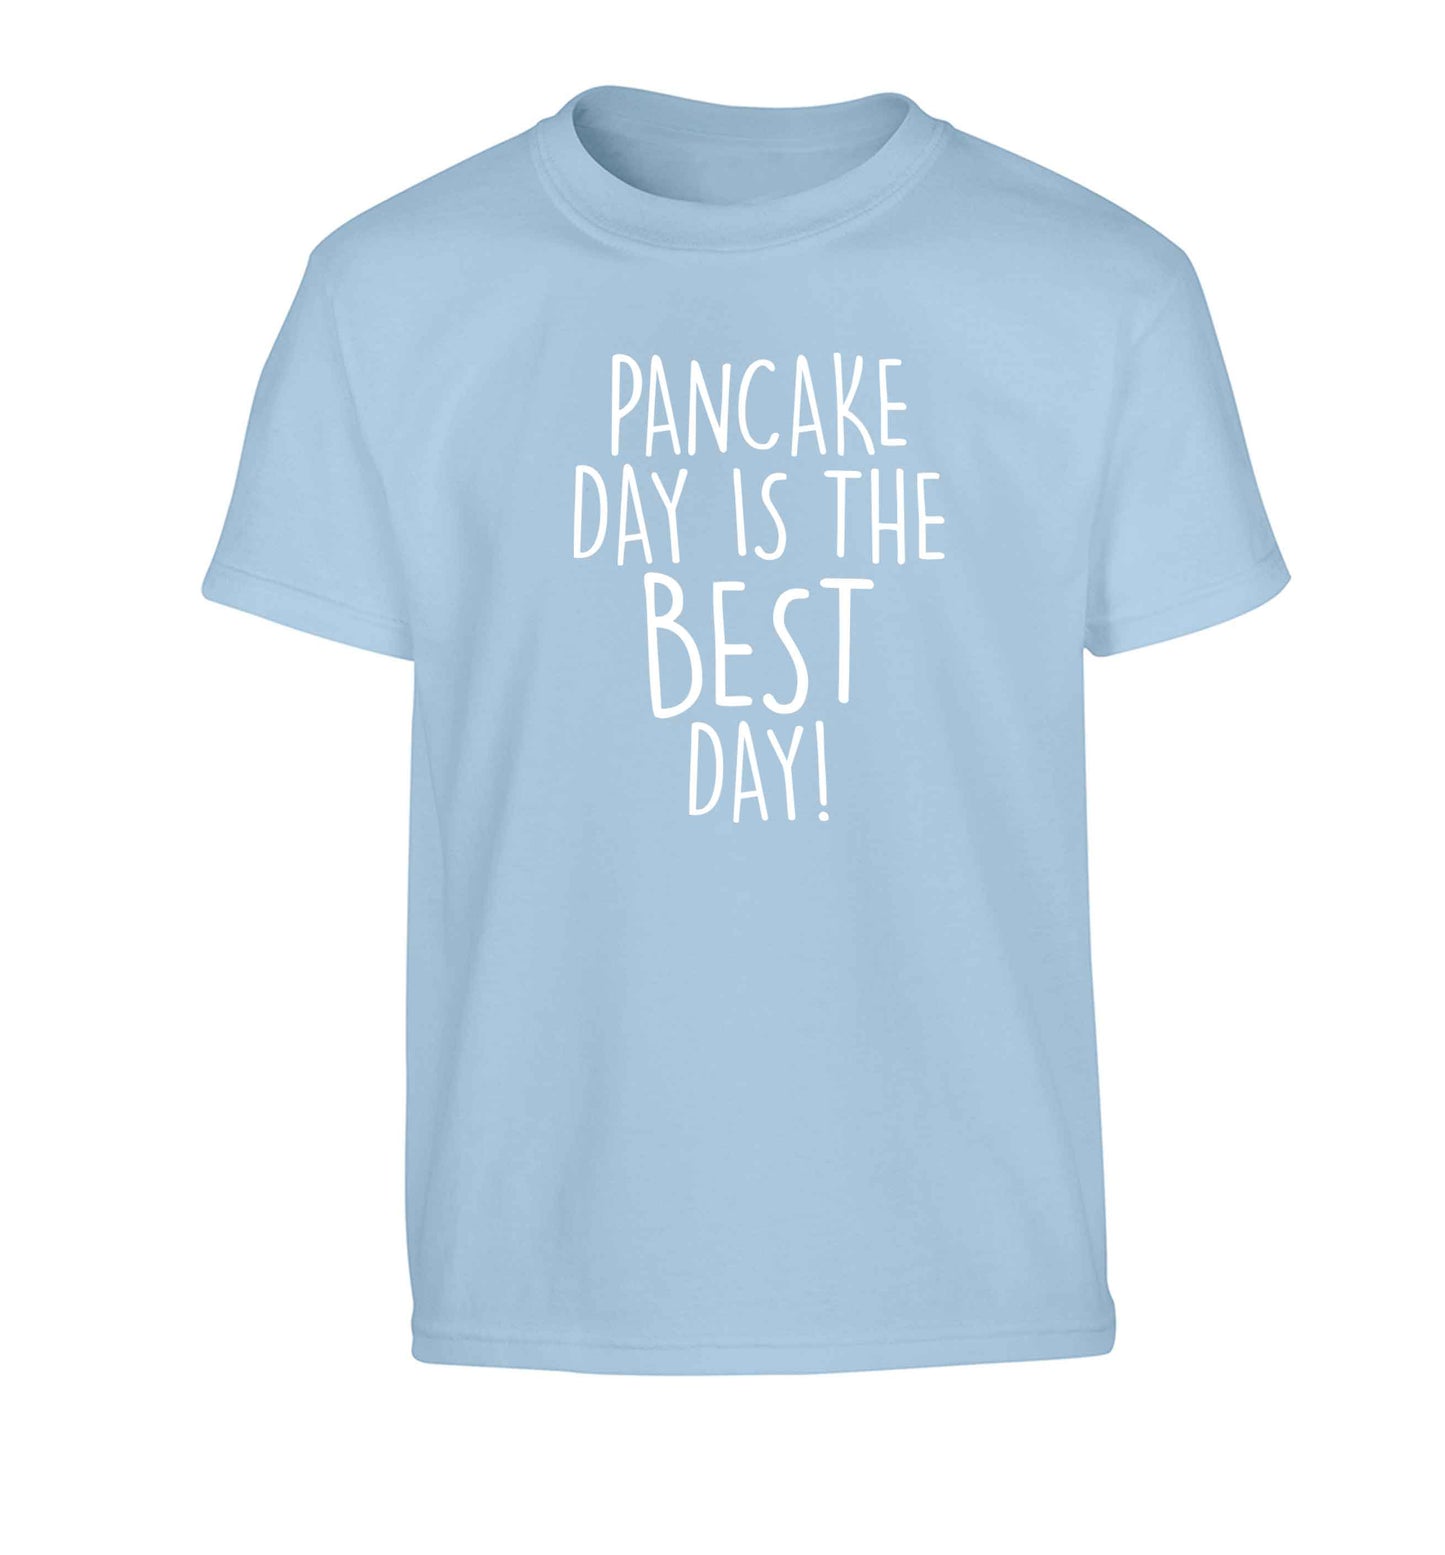 Pancake day is the best day Children's light blue Tshirt 12-13 Years